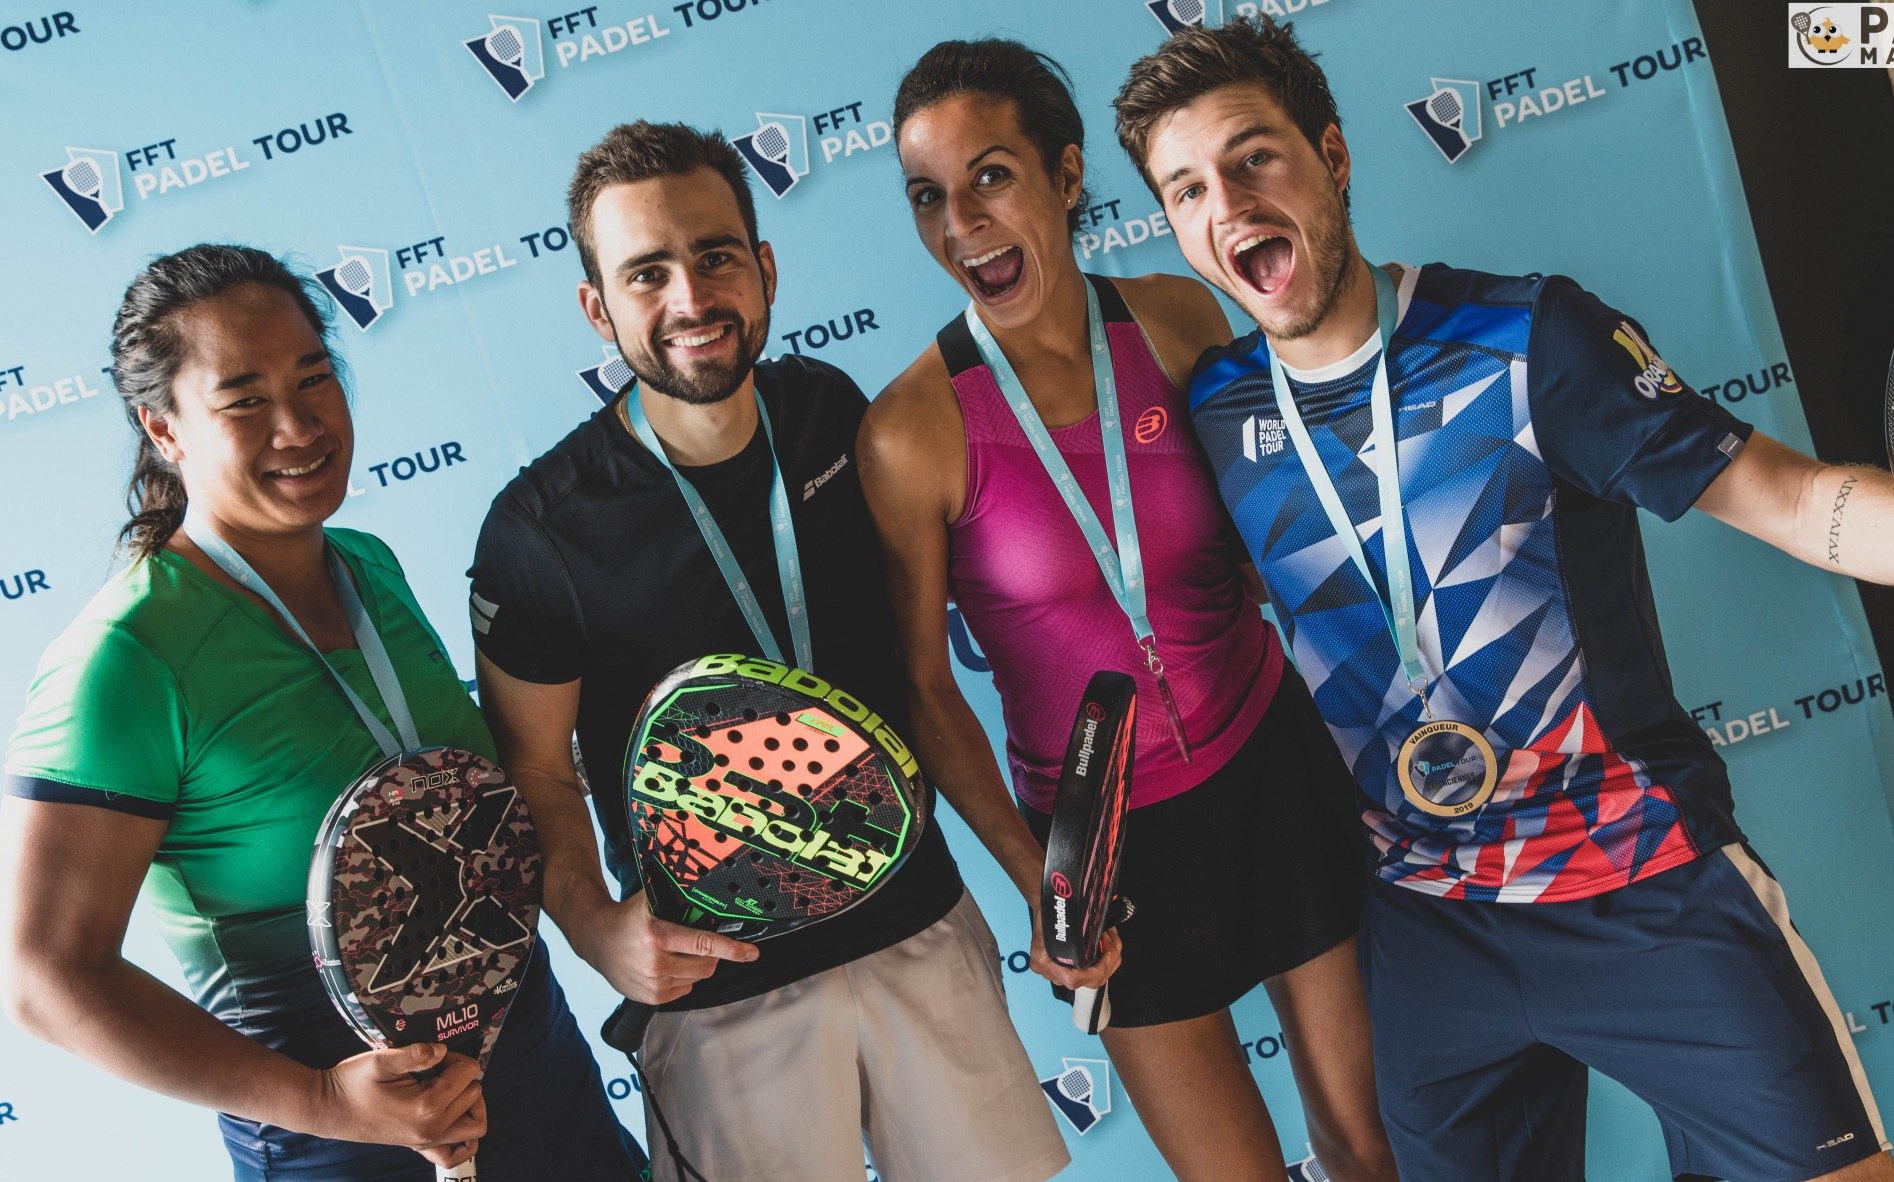 Le FFT Padel Tour Valenciennes for Godallier / Martin and Bergeron / Blanqué